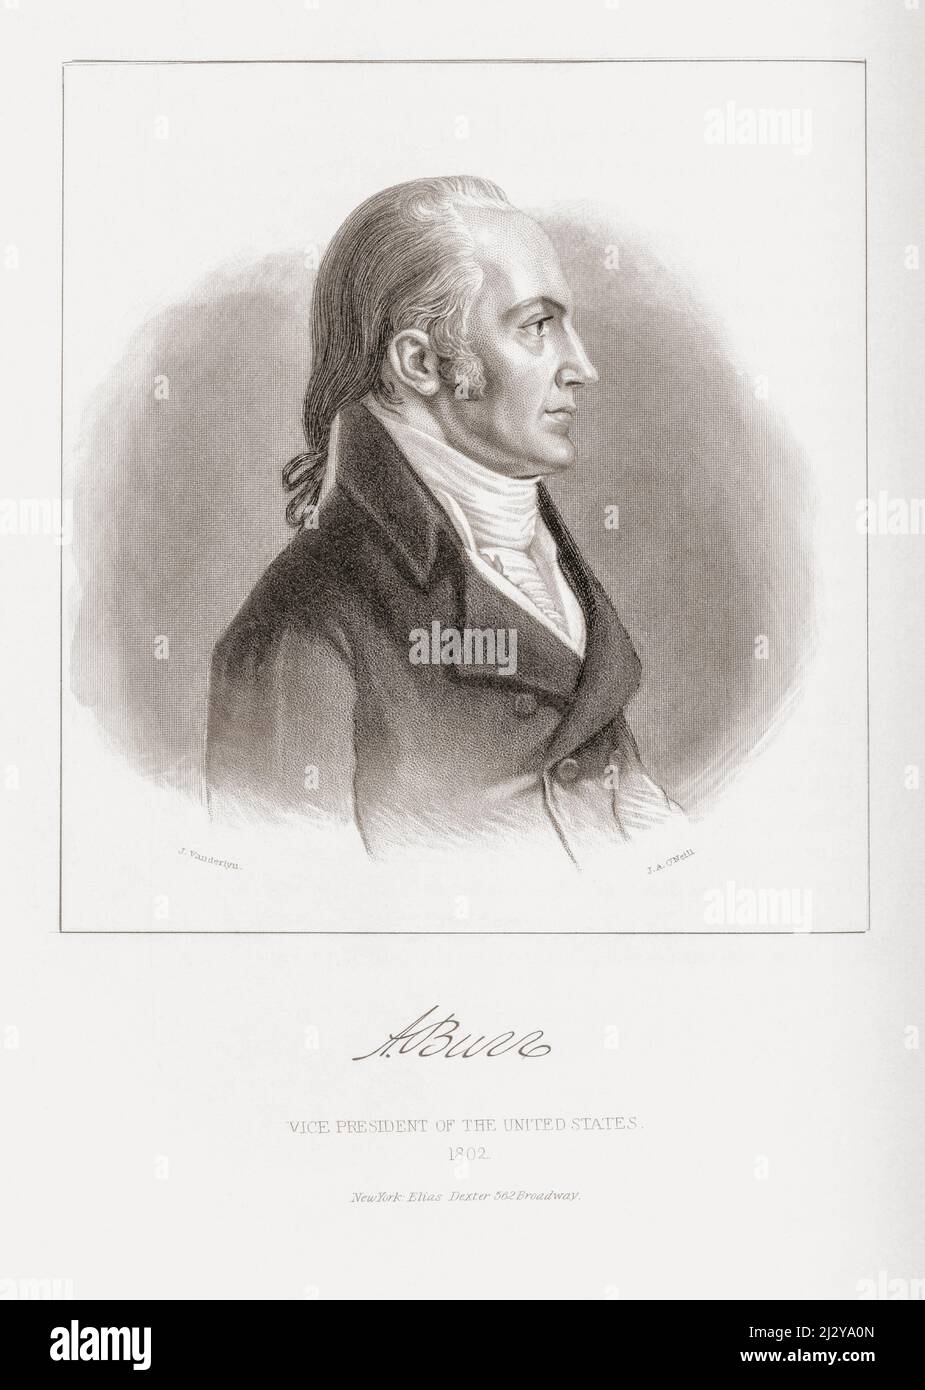 Aaron Burr Jr., 1756 –1836. Third Vice President of the United States (1801–1805).  Aaron Burr's signature.  From an engraving by Henry Wright Smith, after a painting by John Vanderlyn, Stock Photo